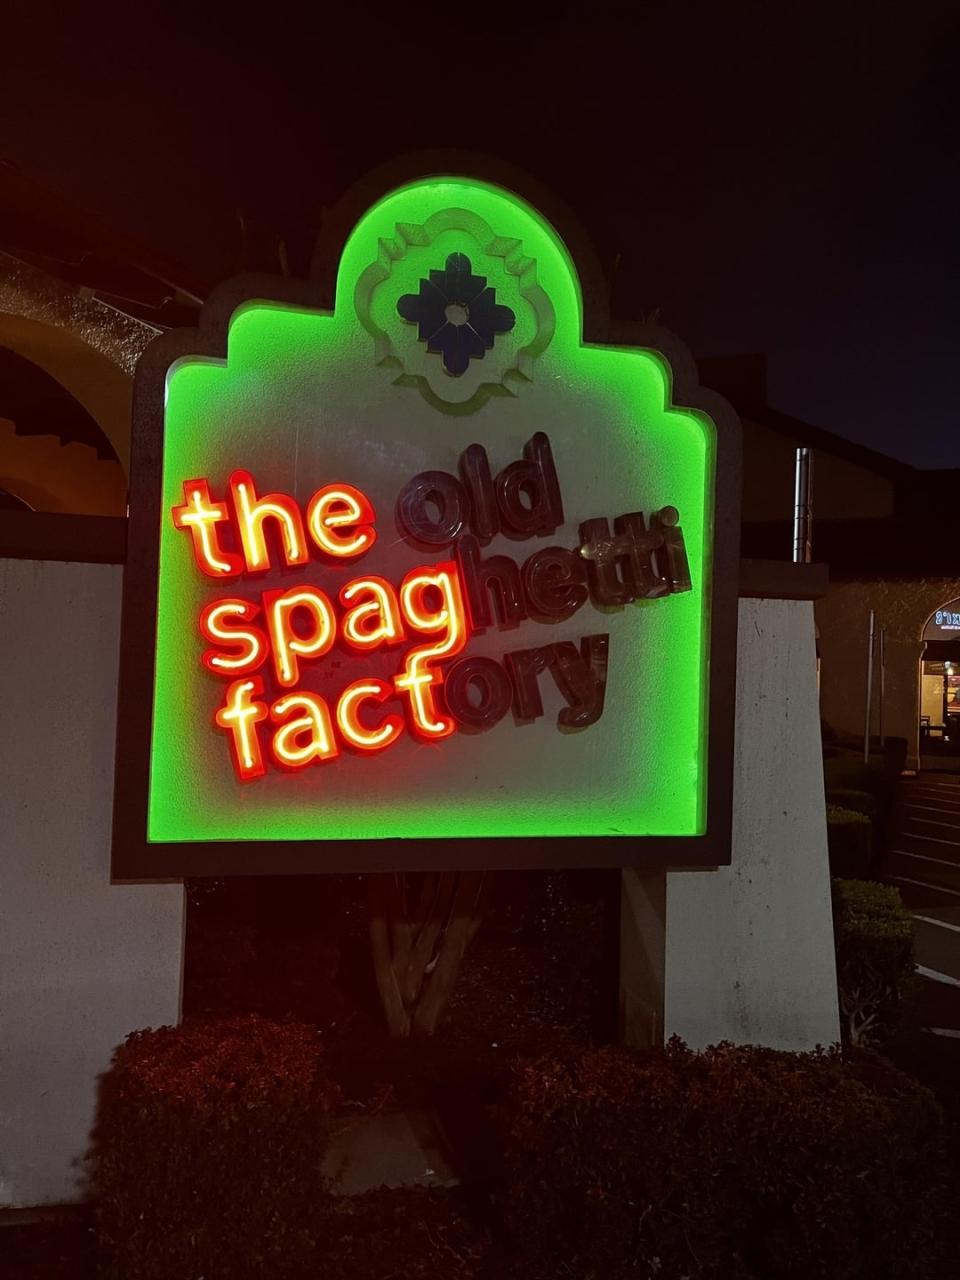 Neon sign of "The Old Spaghetti Factory" partially burnt out to read "the spag fact"